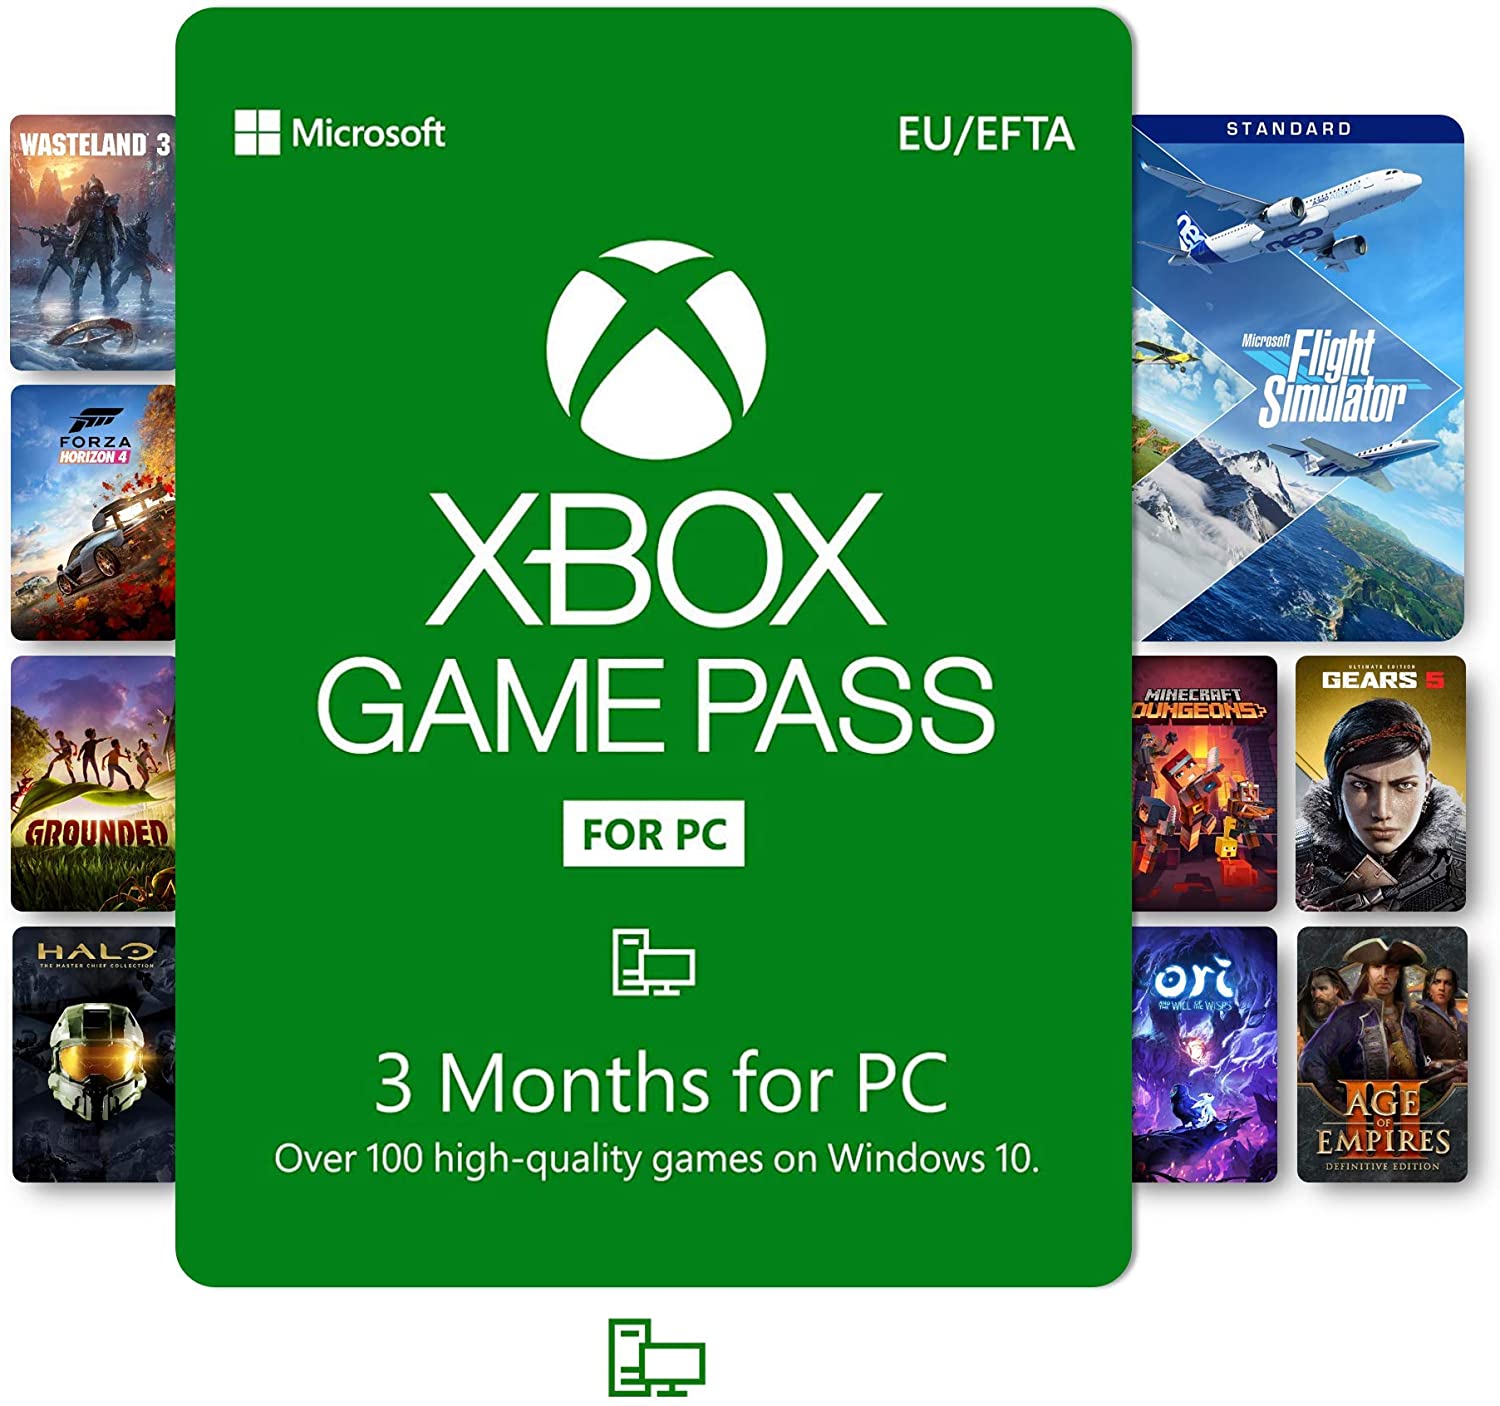 price for pc game pass microsoft